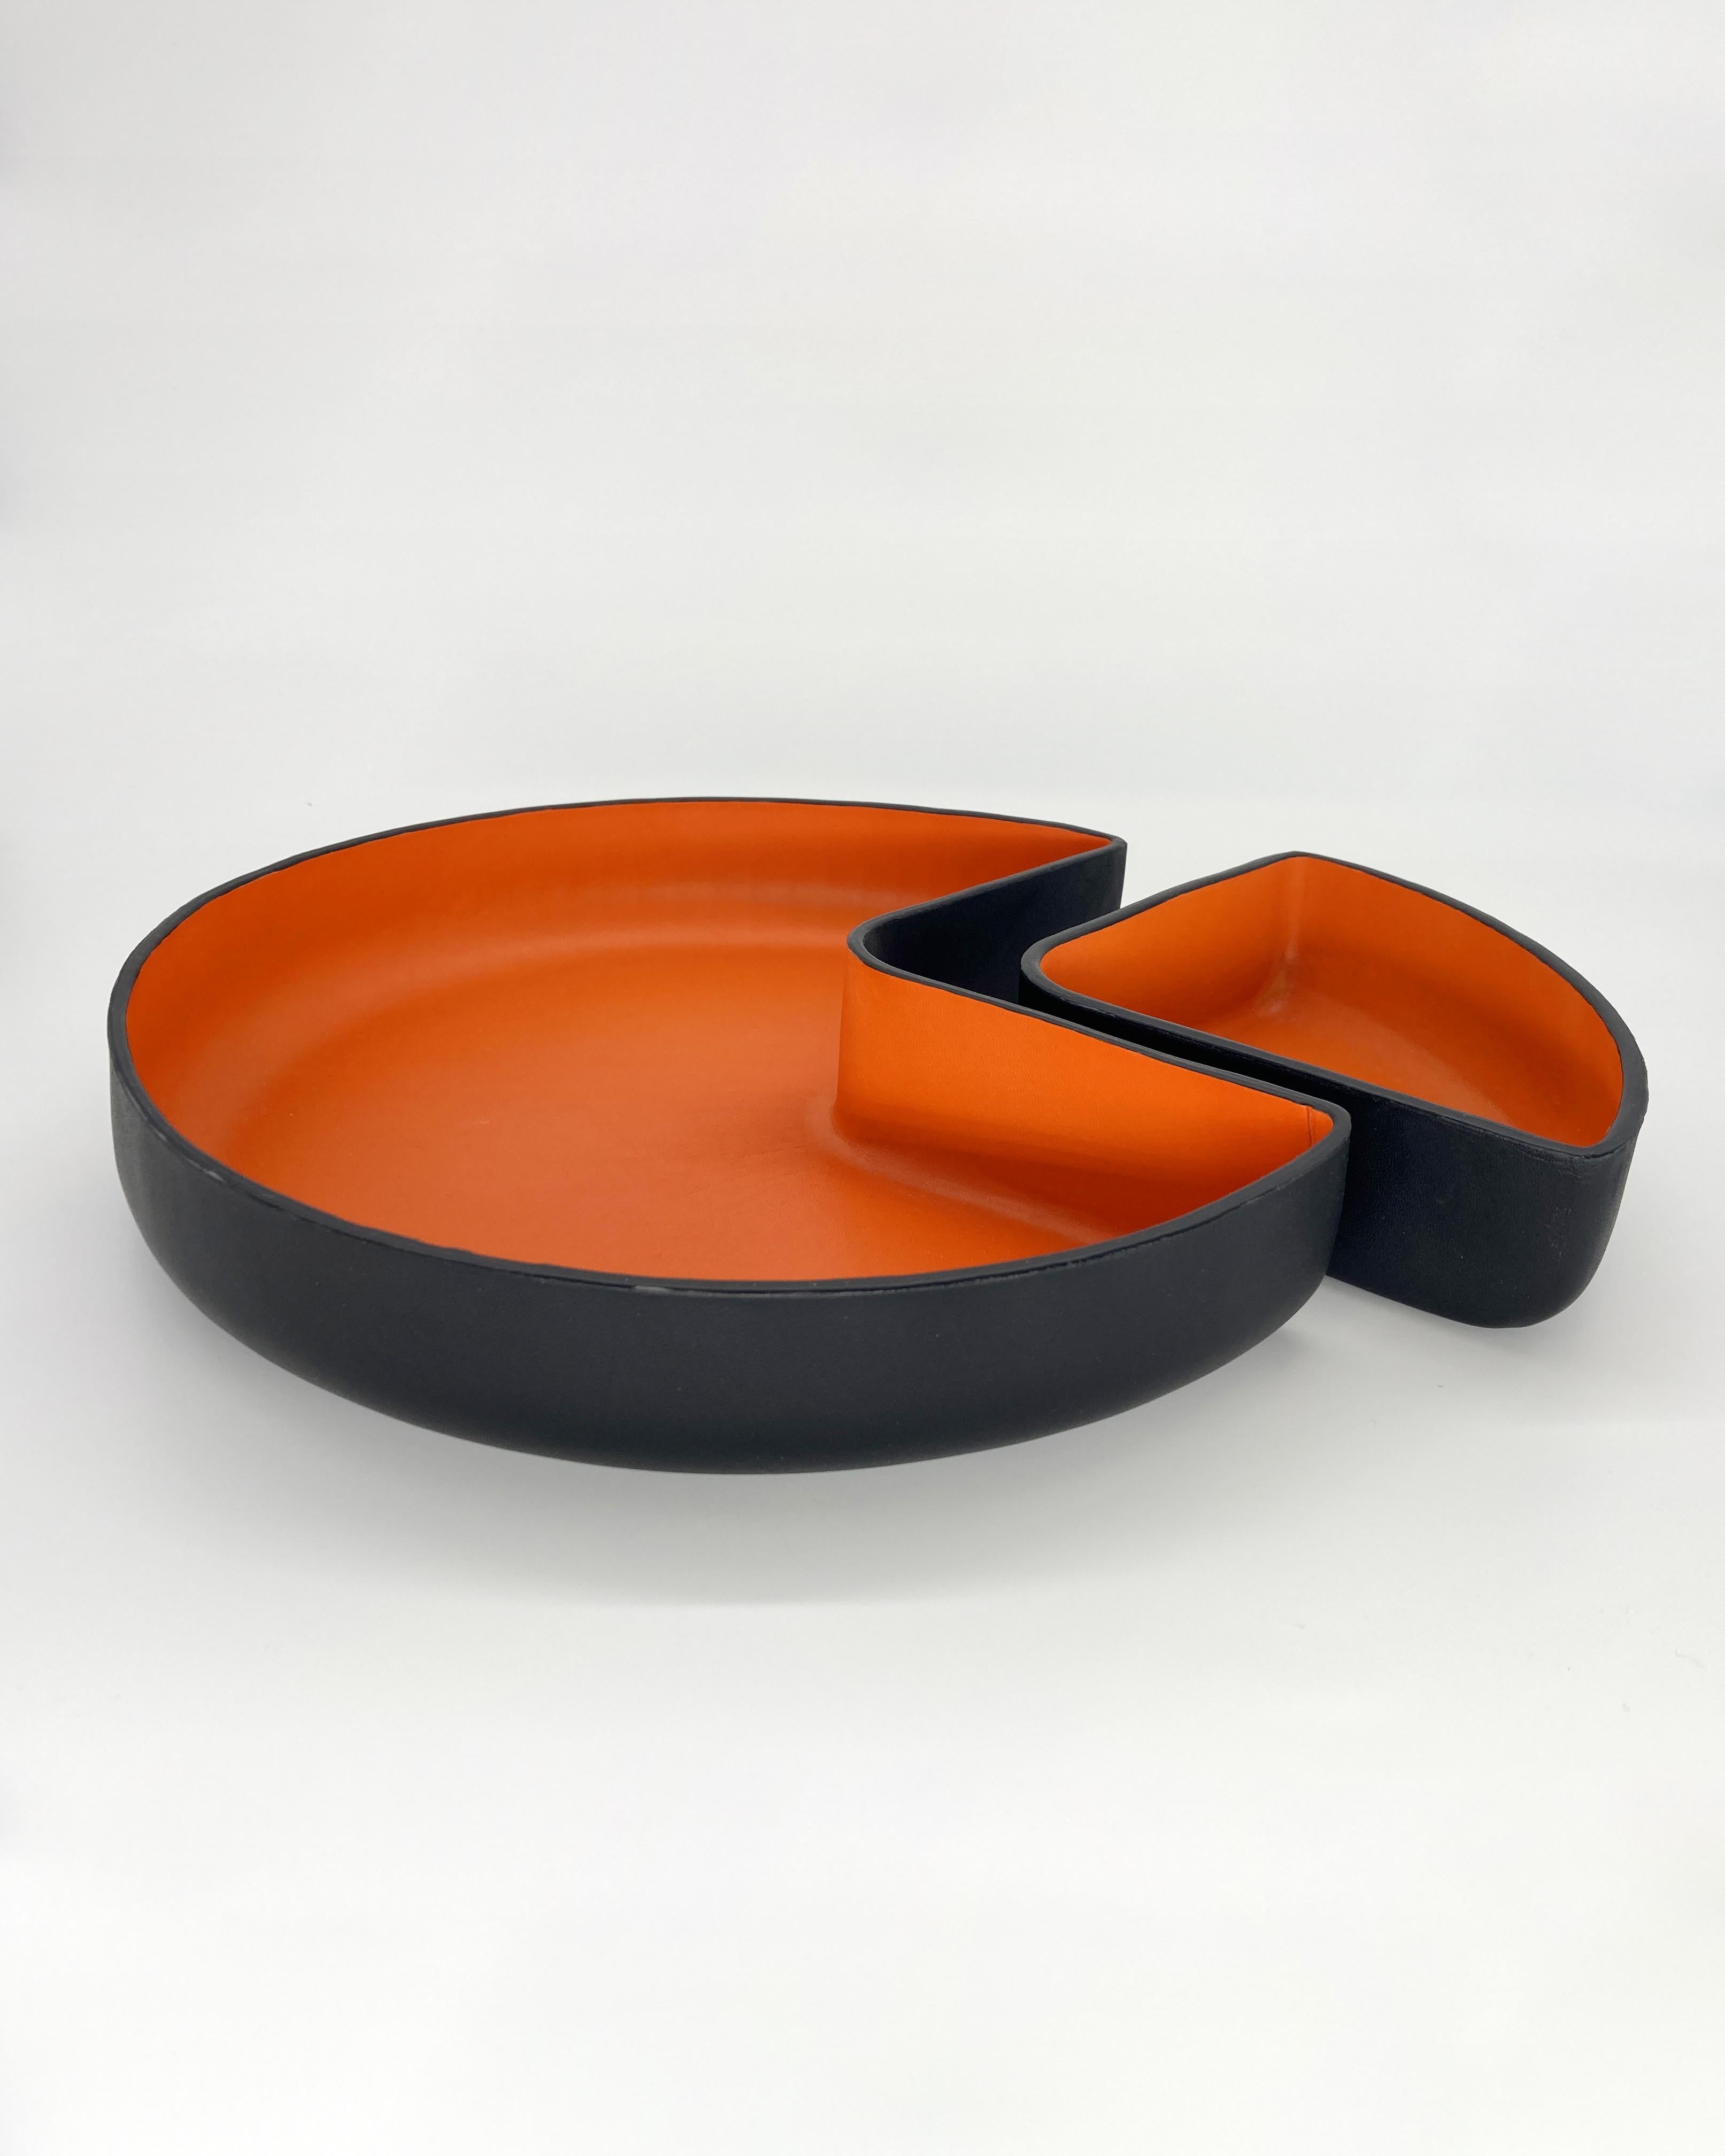 This set of handmade leather bowls in black and orange are the perfect addition to complete your dining room table or as a centerpiece in your living room. Rustic charm meets contemporary handcrafted design sensibility in this exquisite tray set.